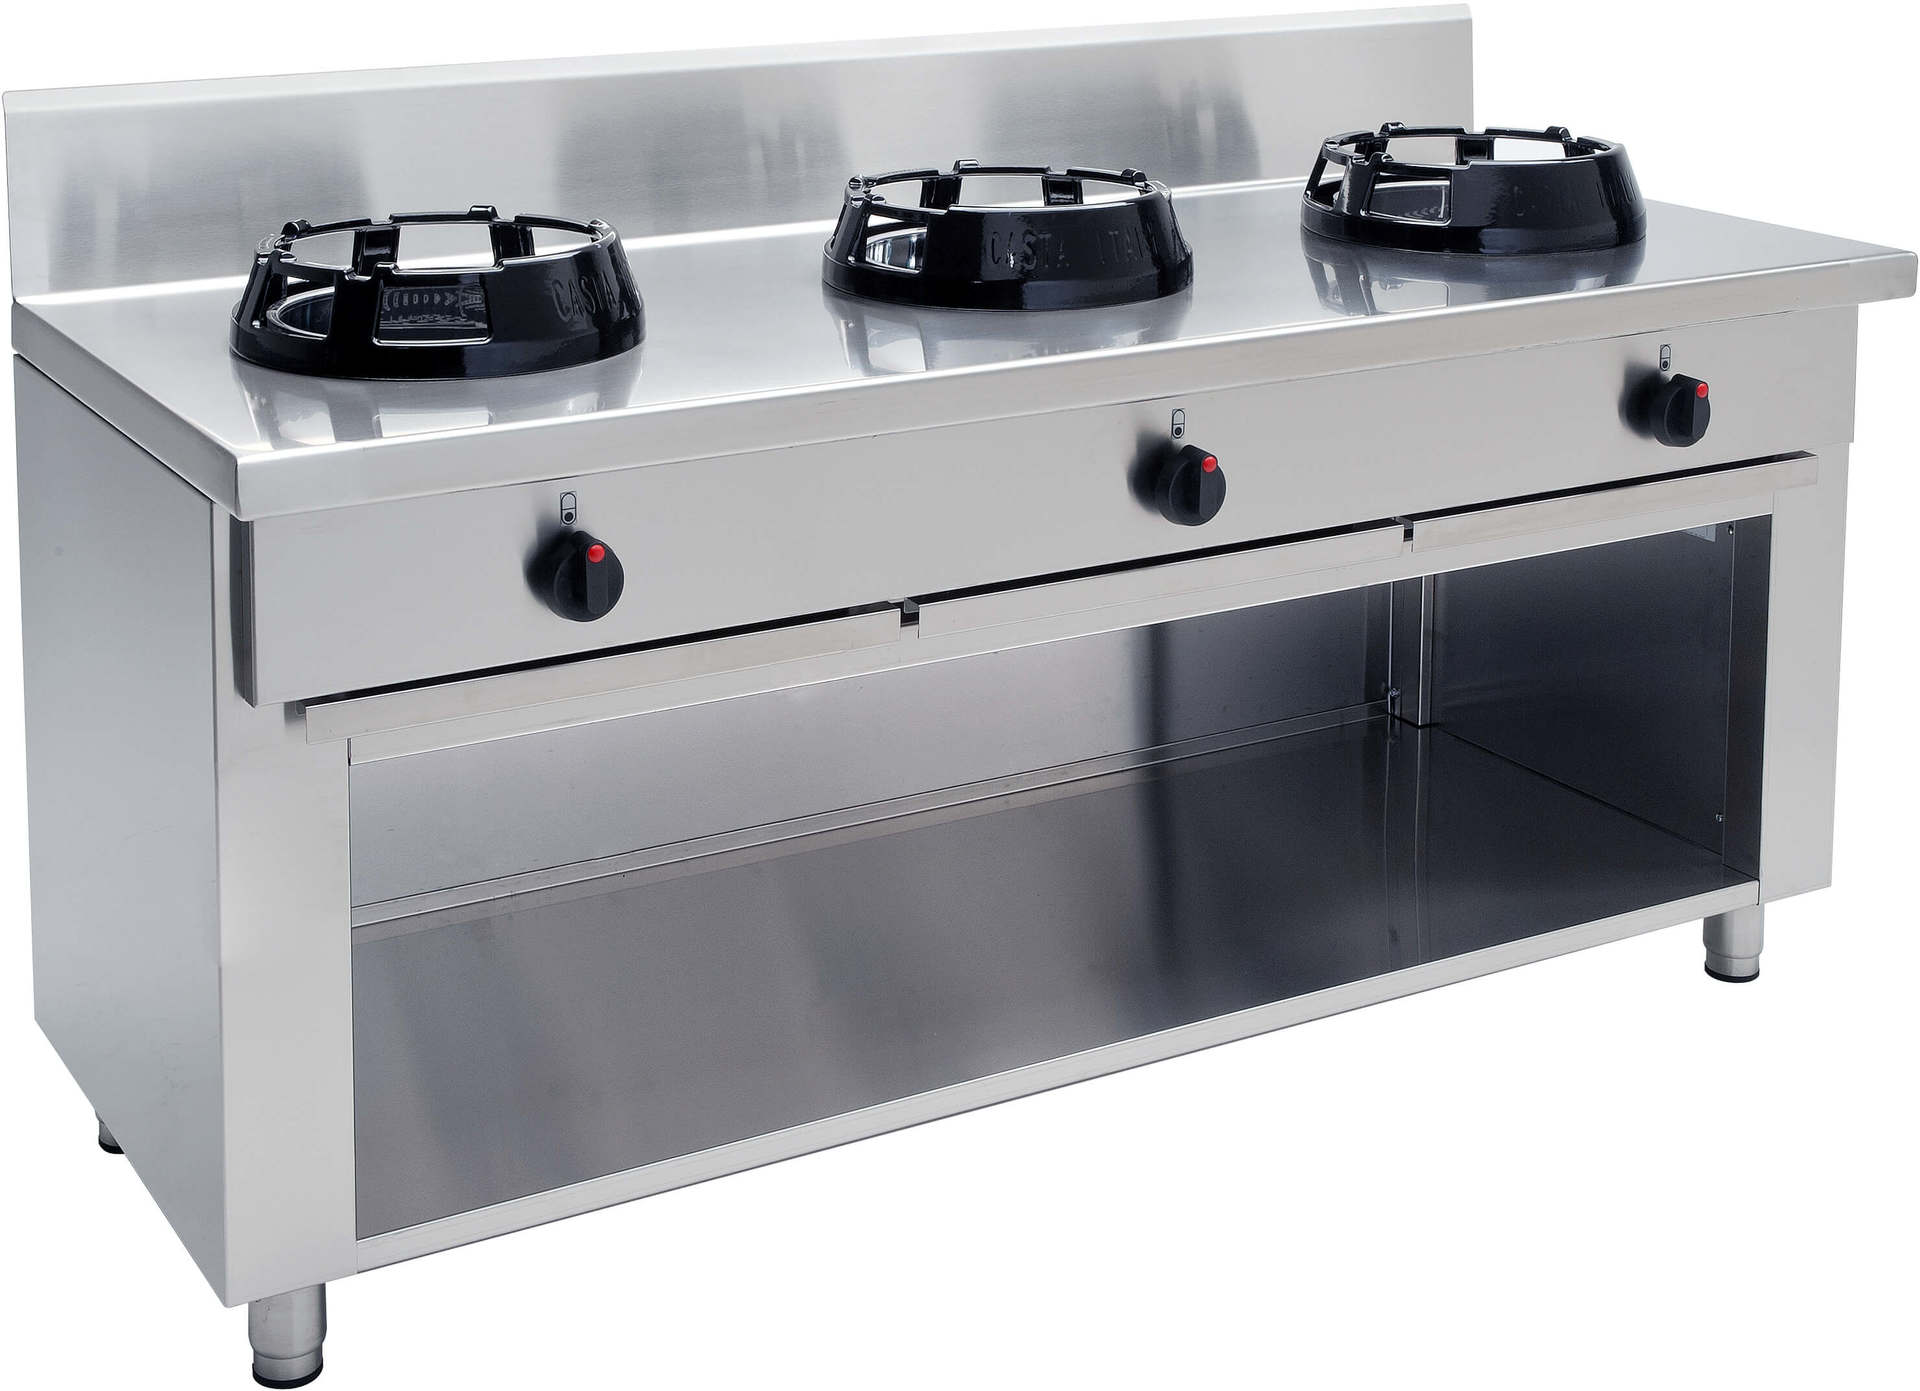 Built-in wok stove with 3 burners